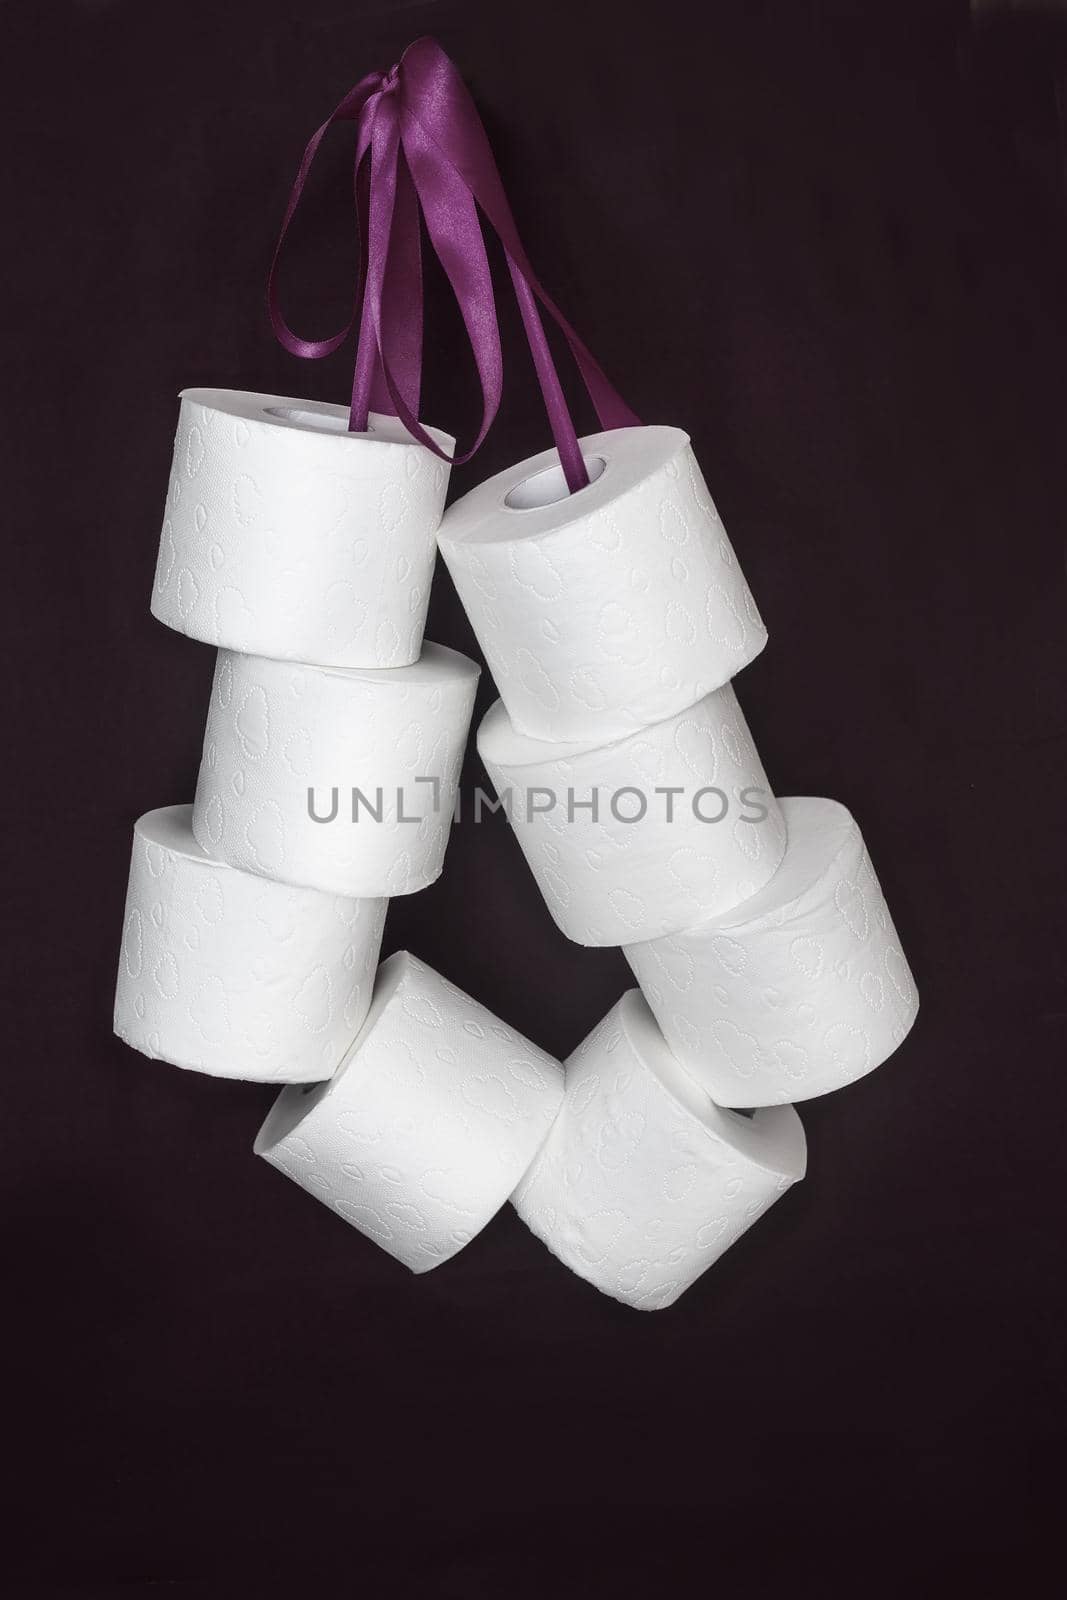 On a dark background, a roll of white toilet paper is connected by a ribbon in a bundle. Front view, vertical orientation